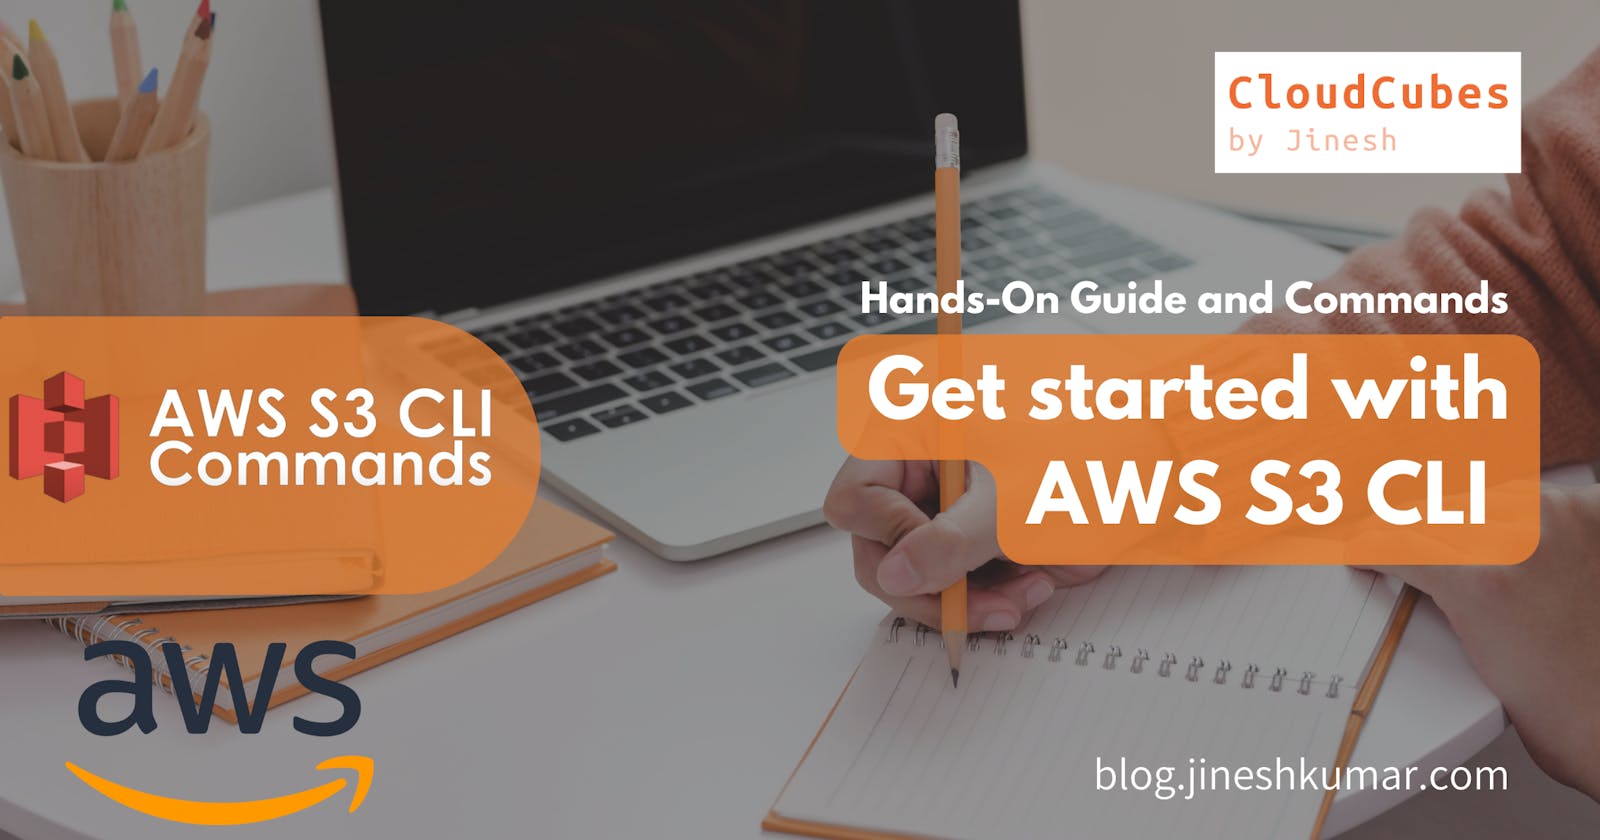 How to get started with AWS S3 CLI Commands